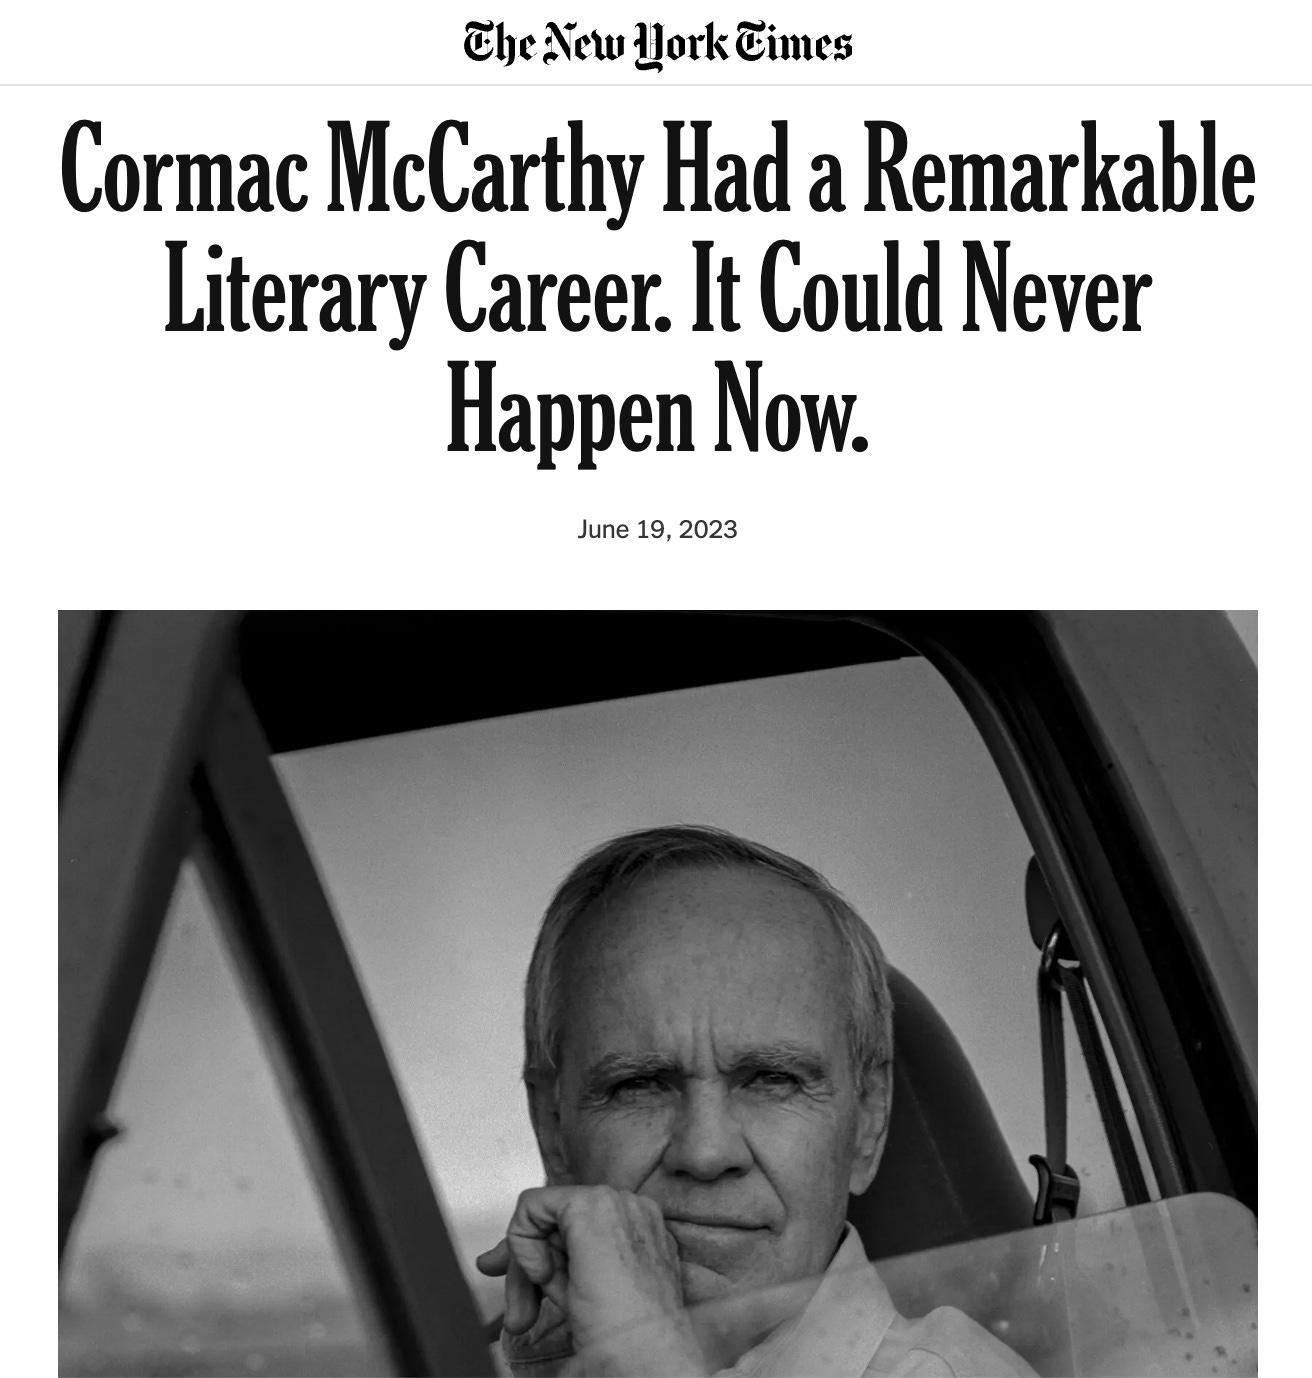 Opinion  Cormac McCarthy's Remarkable Career Could Never Be Reproduced  Today - The New York Times